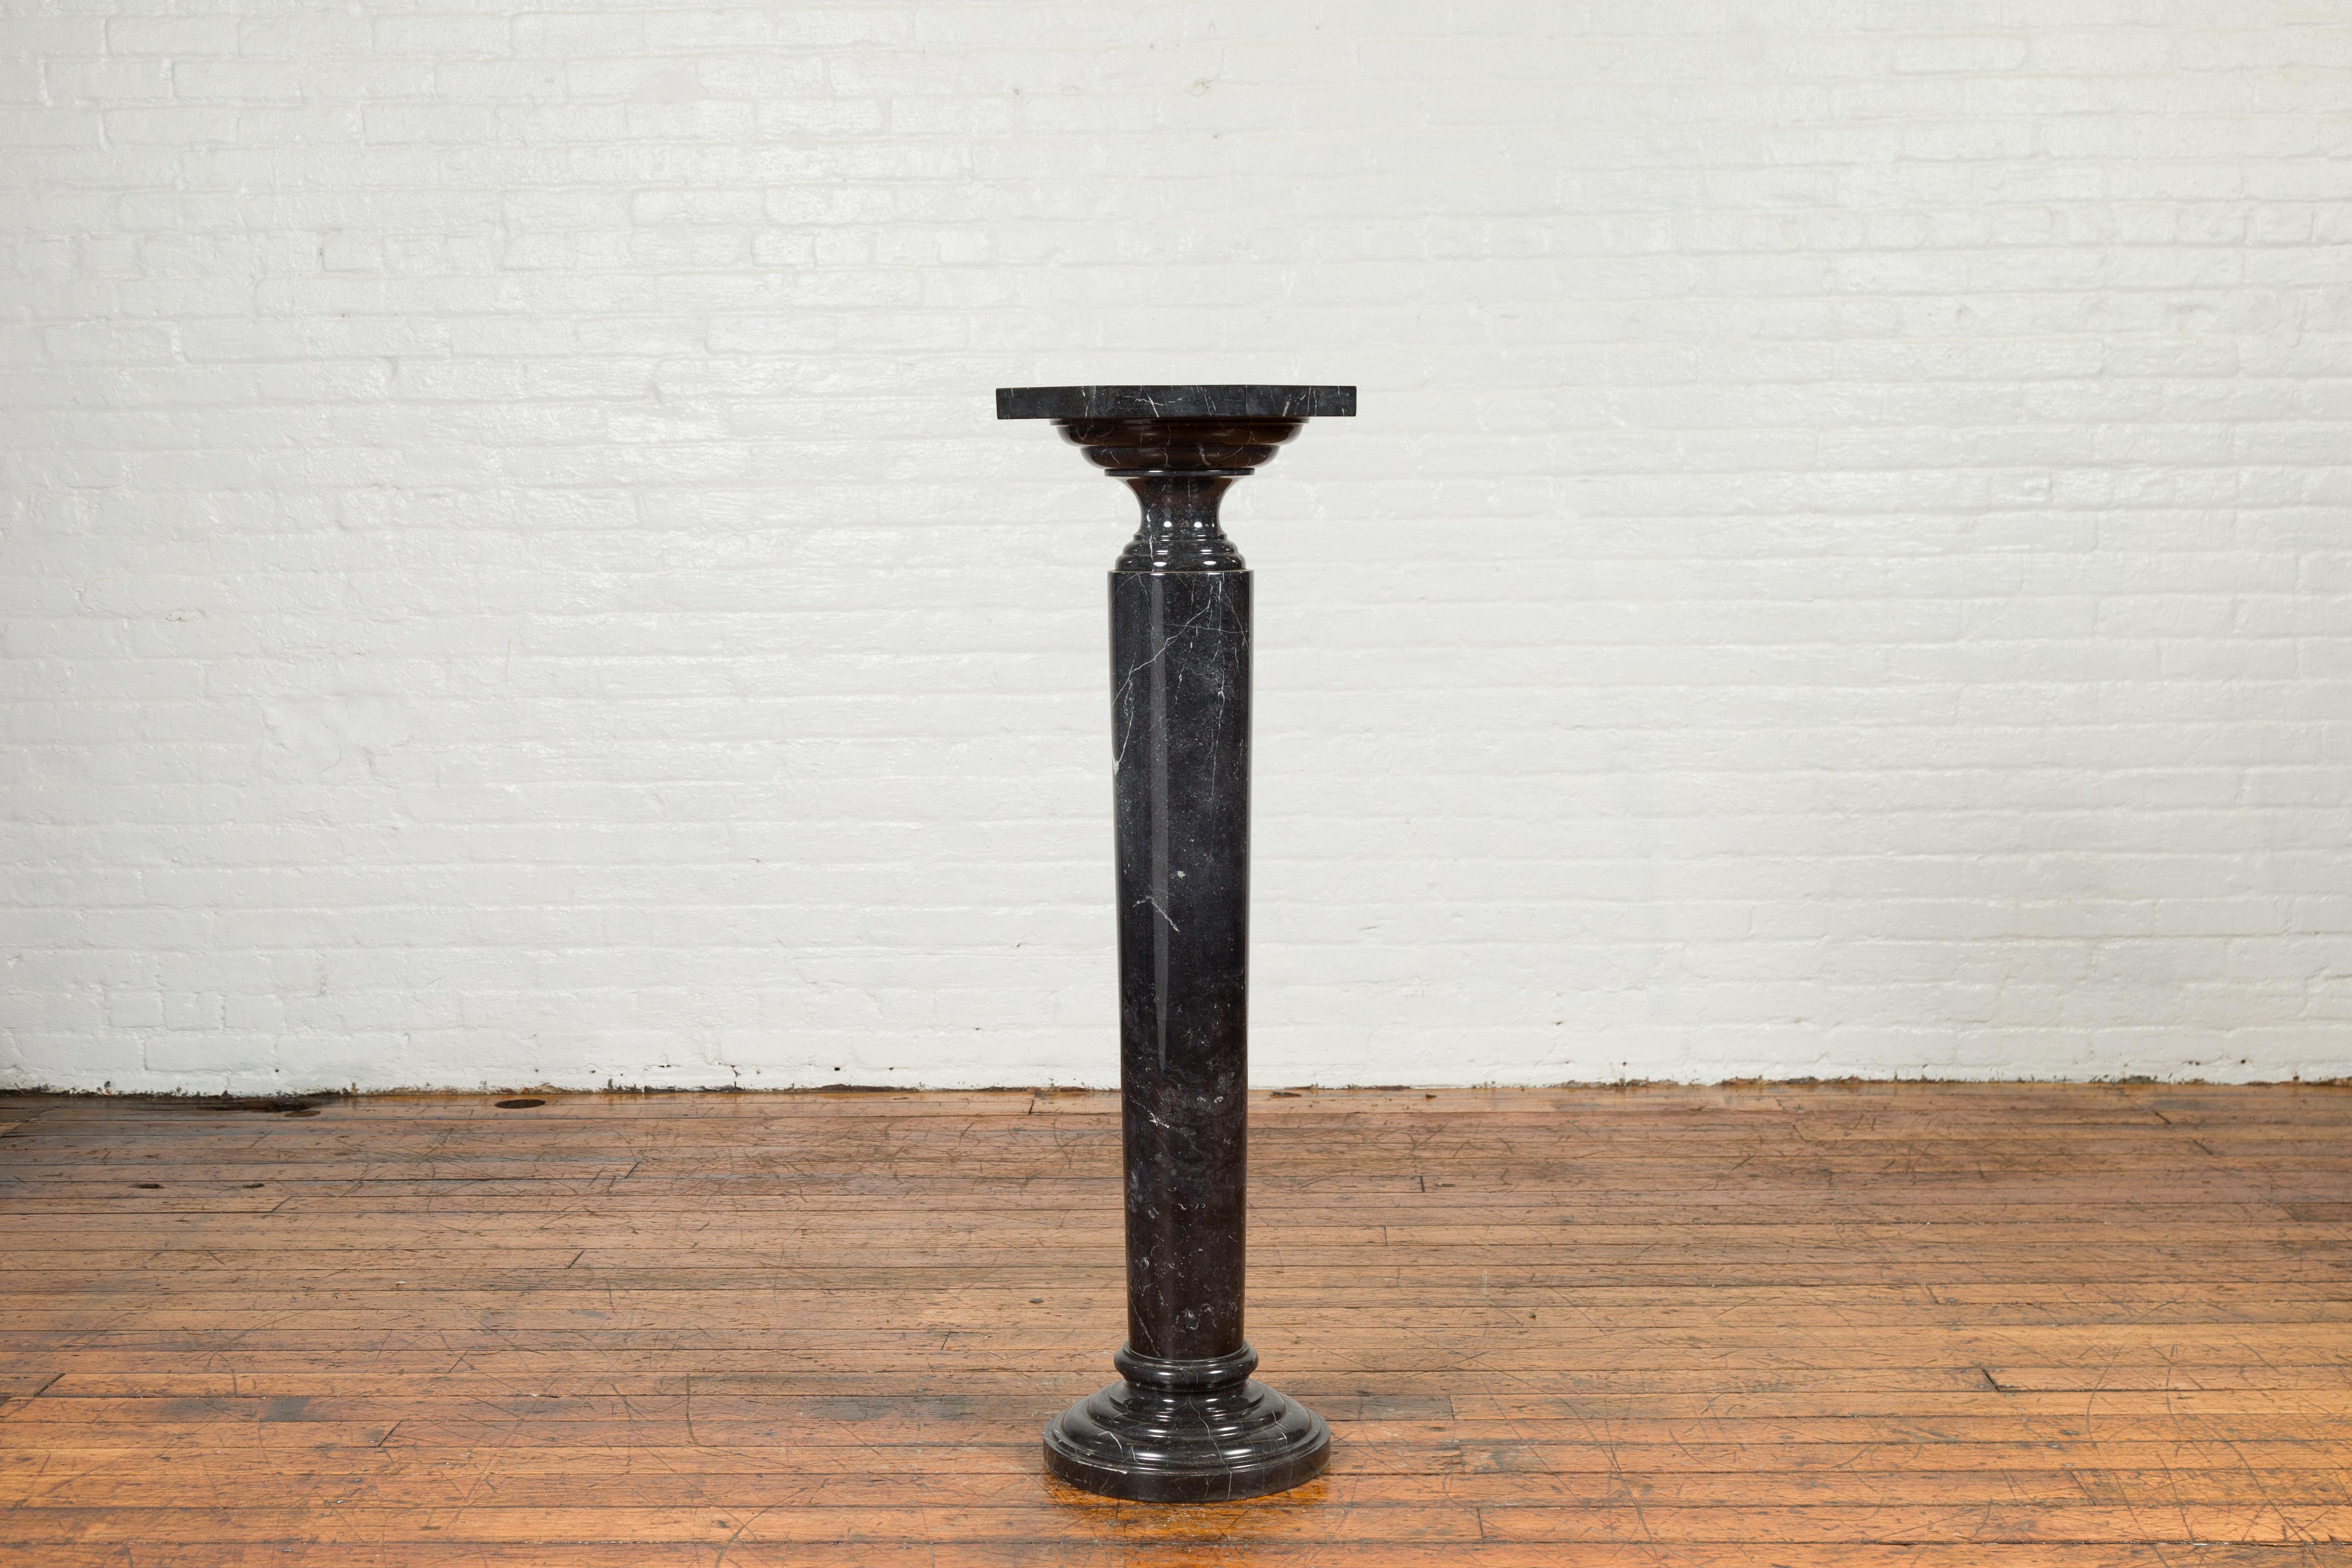 A tall contemporary Indian black Carrara marble pedestal with octagonal top and column base. Crafted in India, this tall pedestal draws our attention with its black veined Carrara marble and pure lines. Featuring an octagonal top, the pedestal